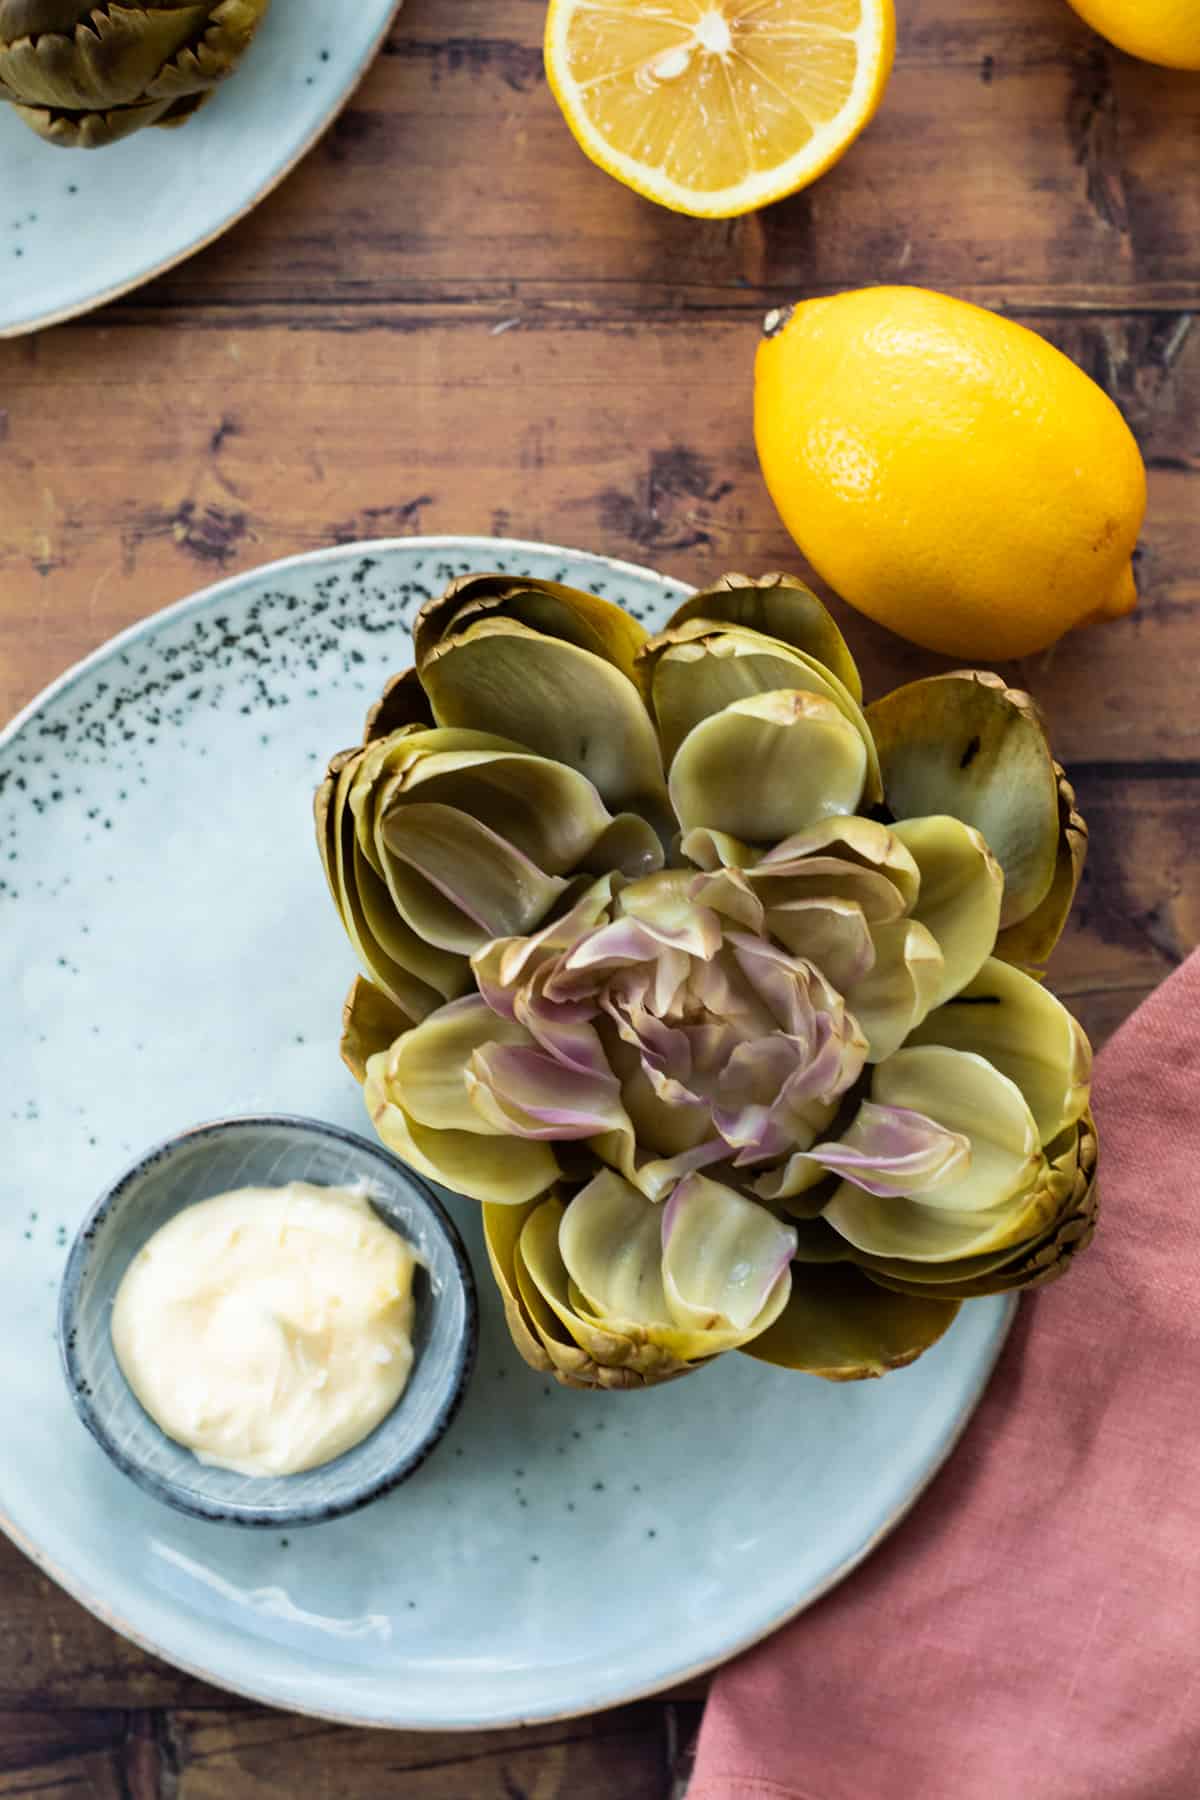 top down view of an opened artichoke on a blue plate